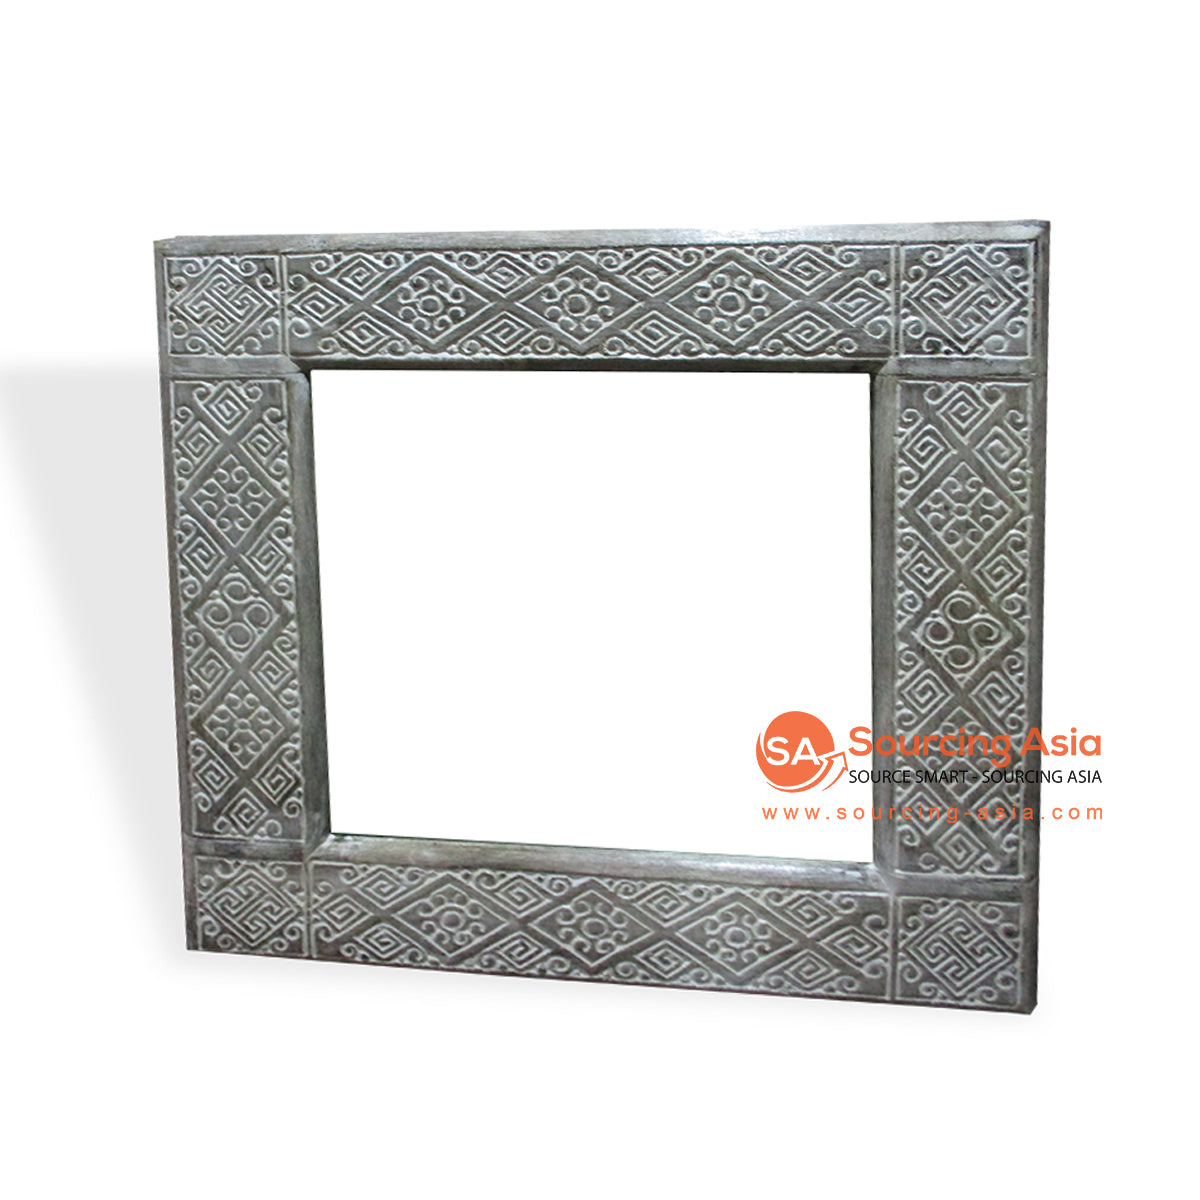 CDA002-3 WHITE WOODEN TRIBAL CARVED SQUARE MIRROR